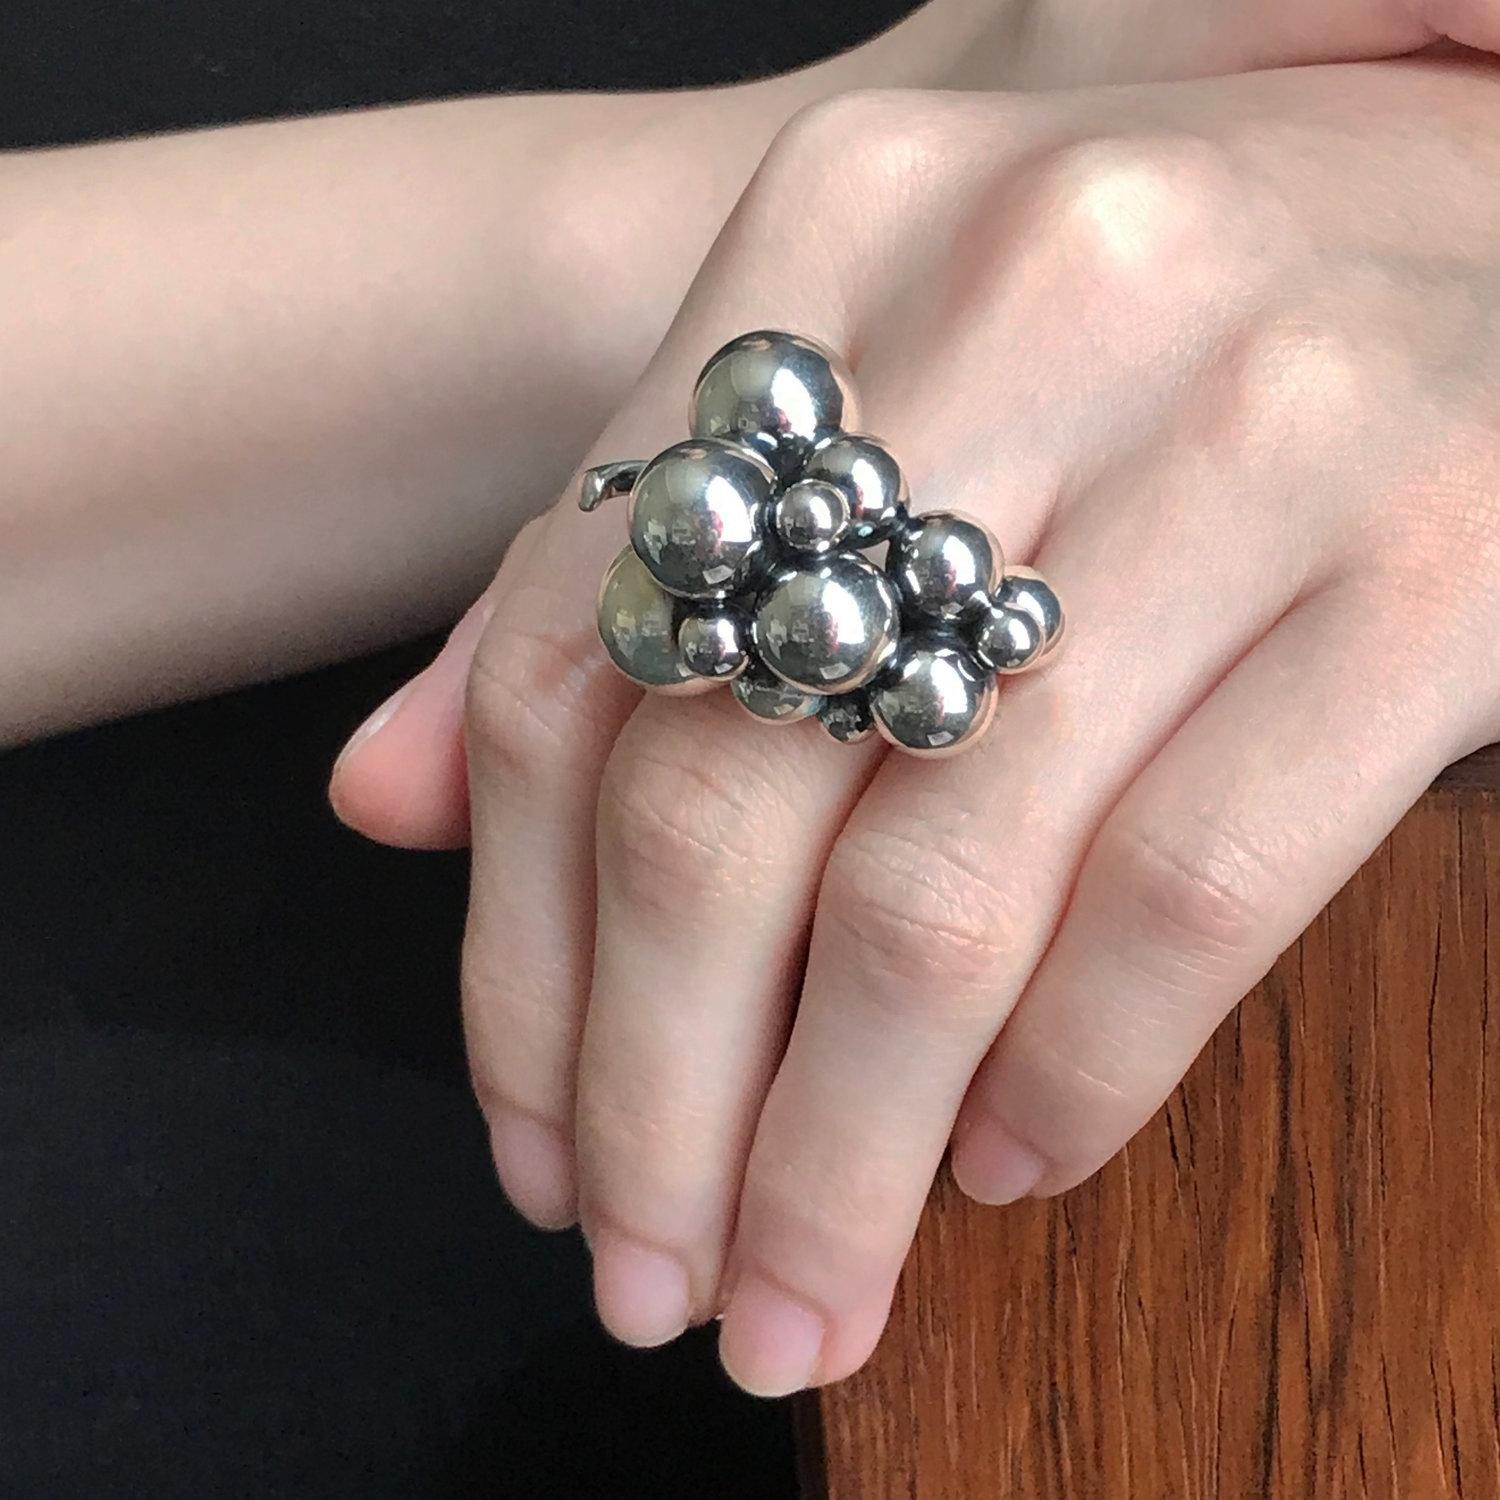 Georg Jensen Sterling Silver Large Grape Ring.  Size 7.5, Adjustable

Bold statement piece. This is the largest of this design.    

Designer: Georg Jensen
Maker: Georg Jensen
Design #: N/A
Morden Production
Dimensions:  1’’ W x 1.5’’
              